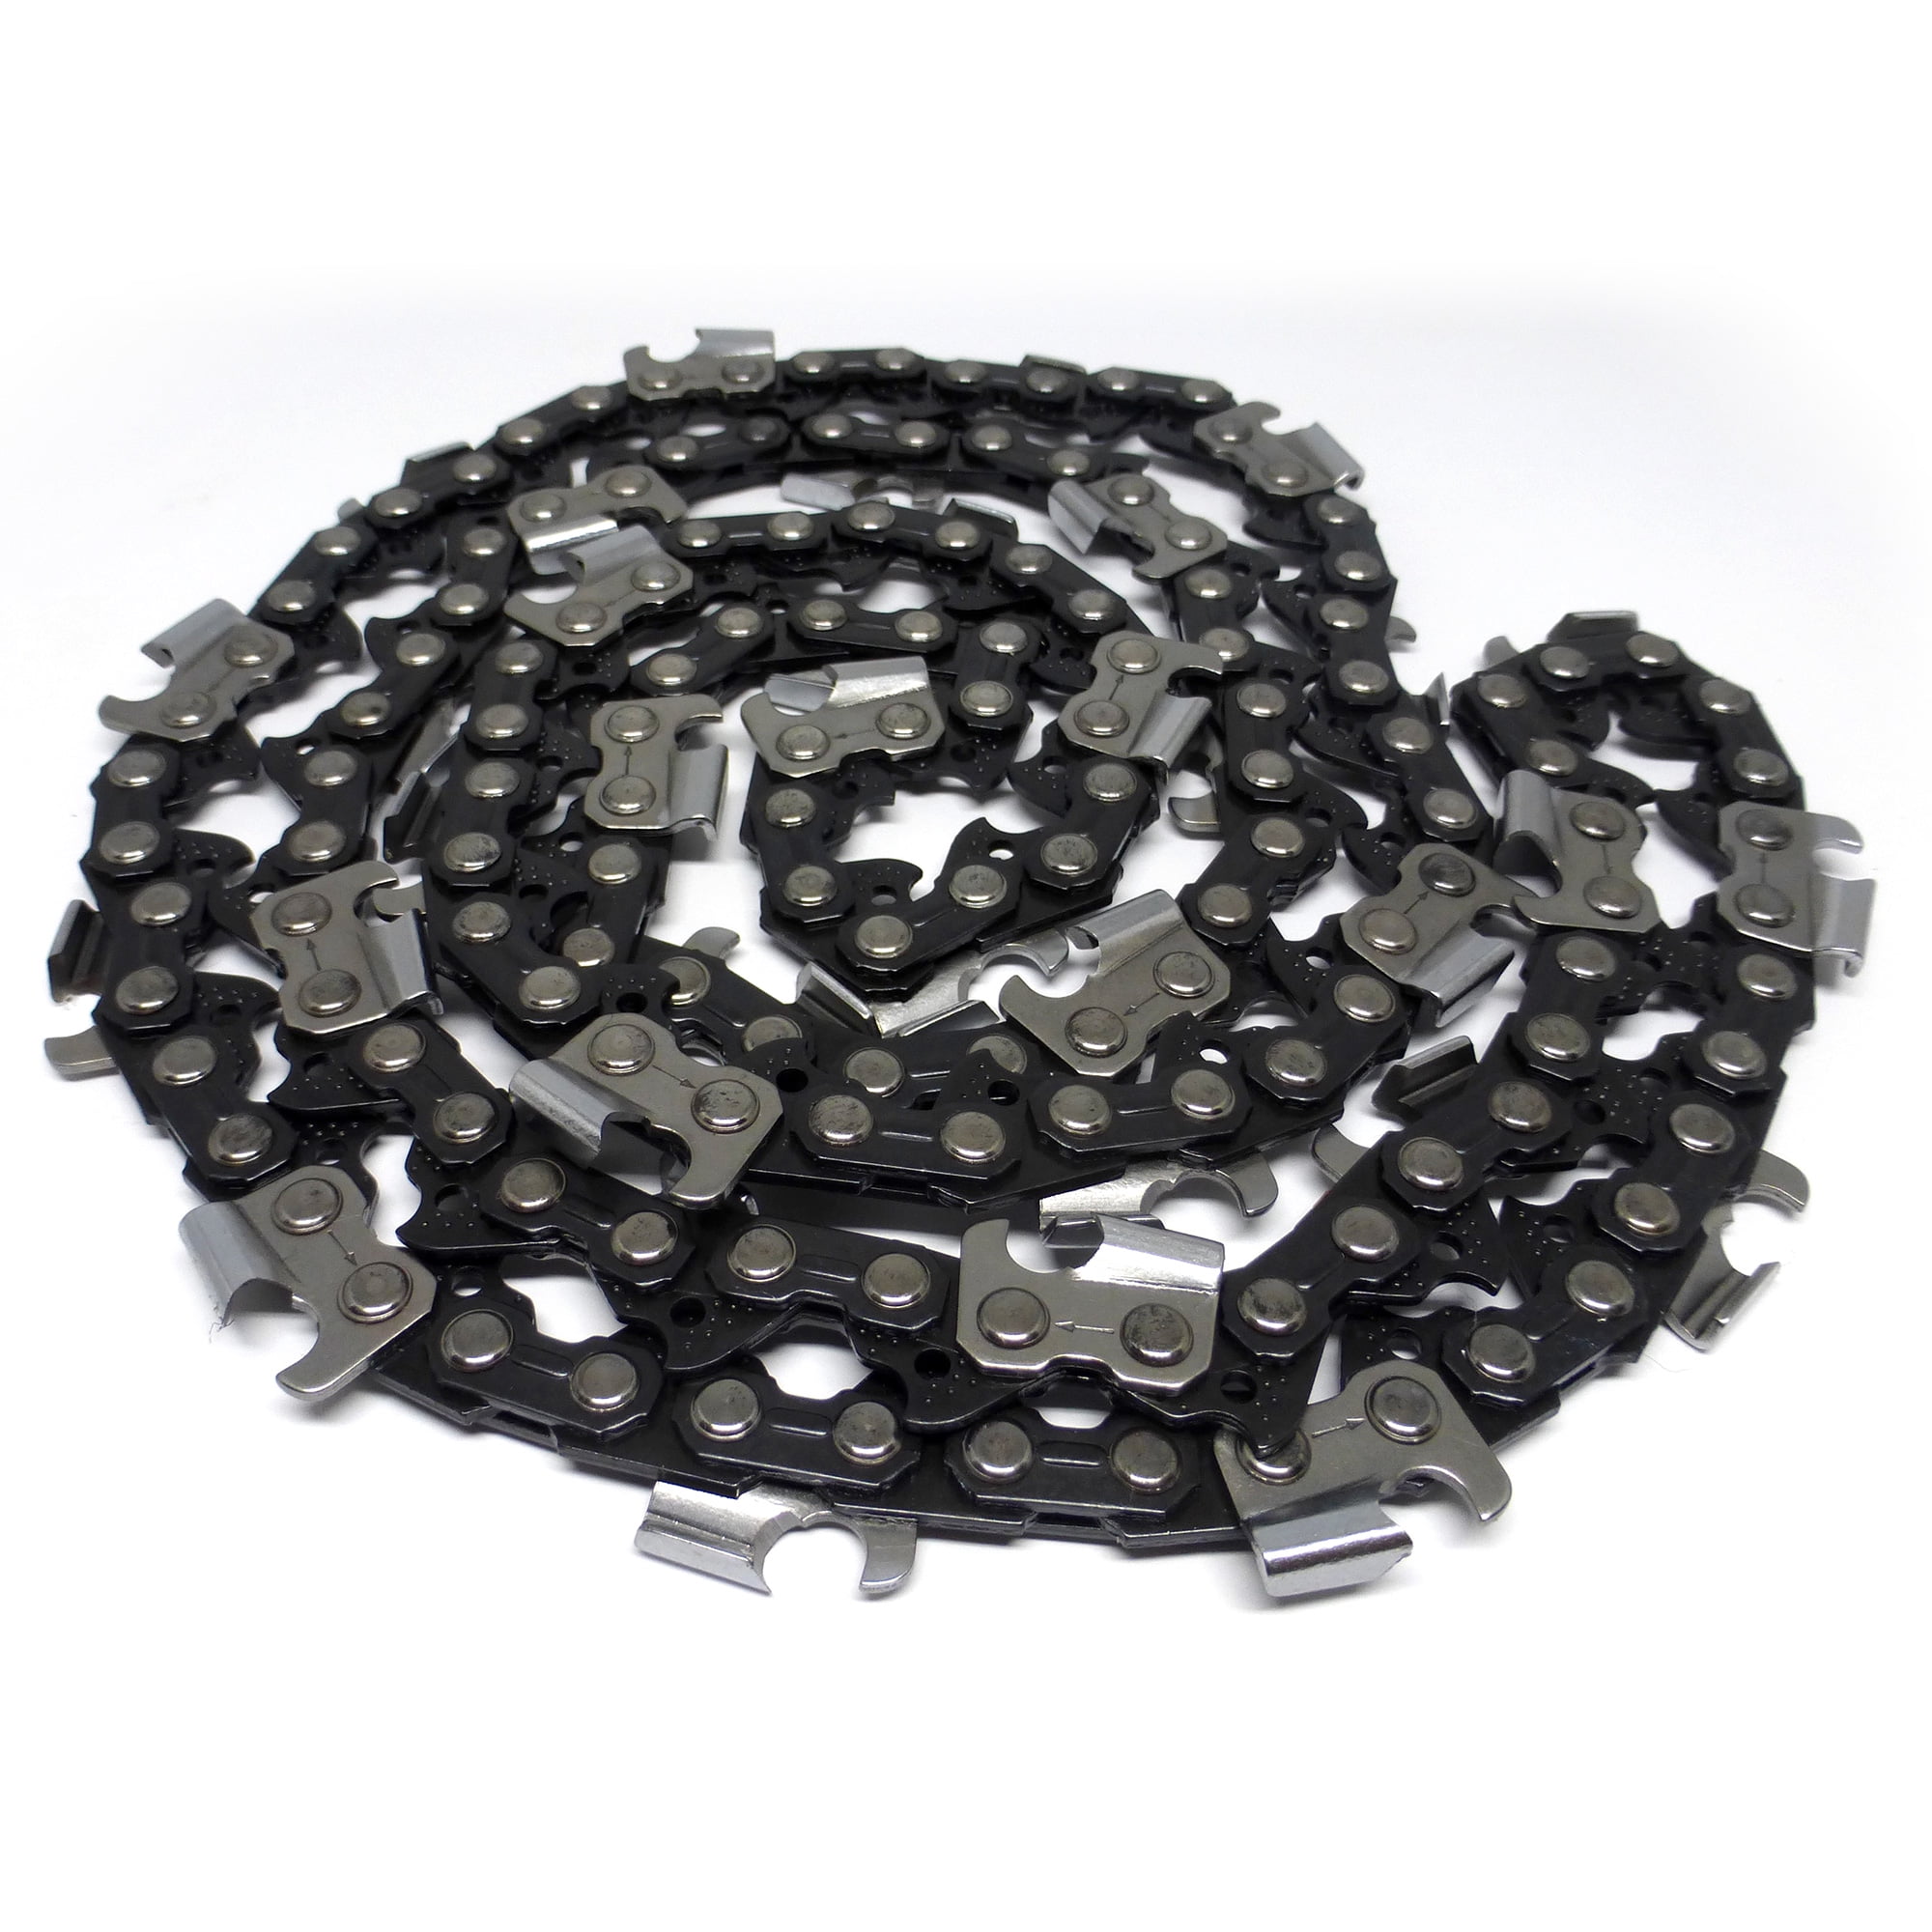 2 Pack 20" Saw Chain 3/8" Pitch .058" Gauge 72 DL Drive links